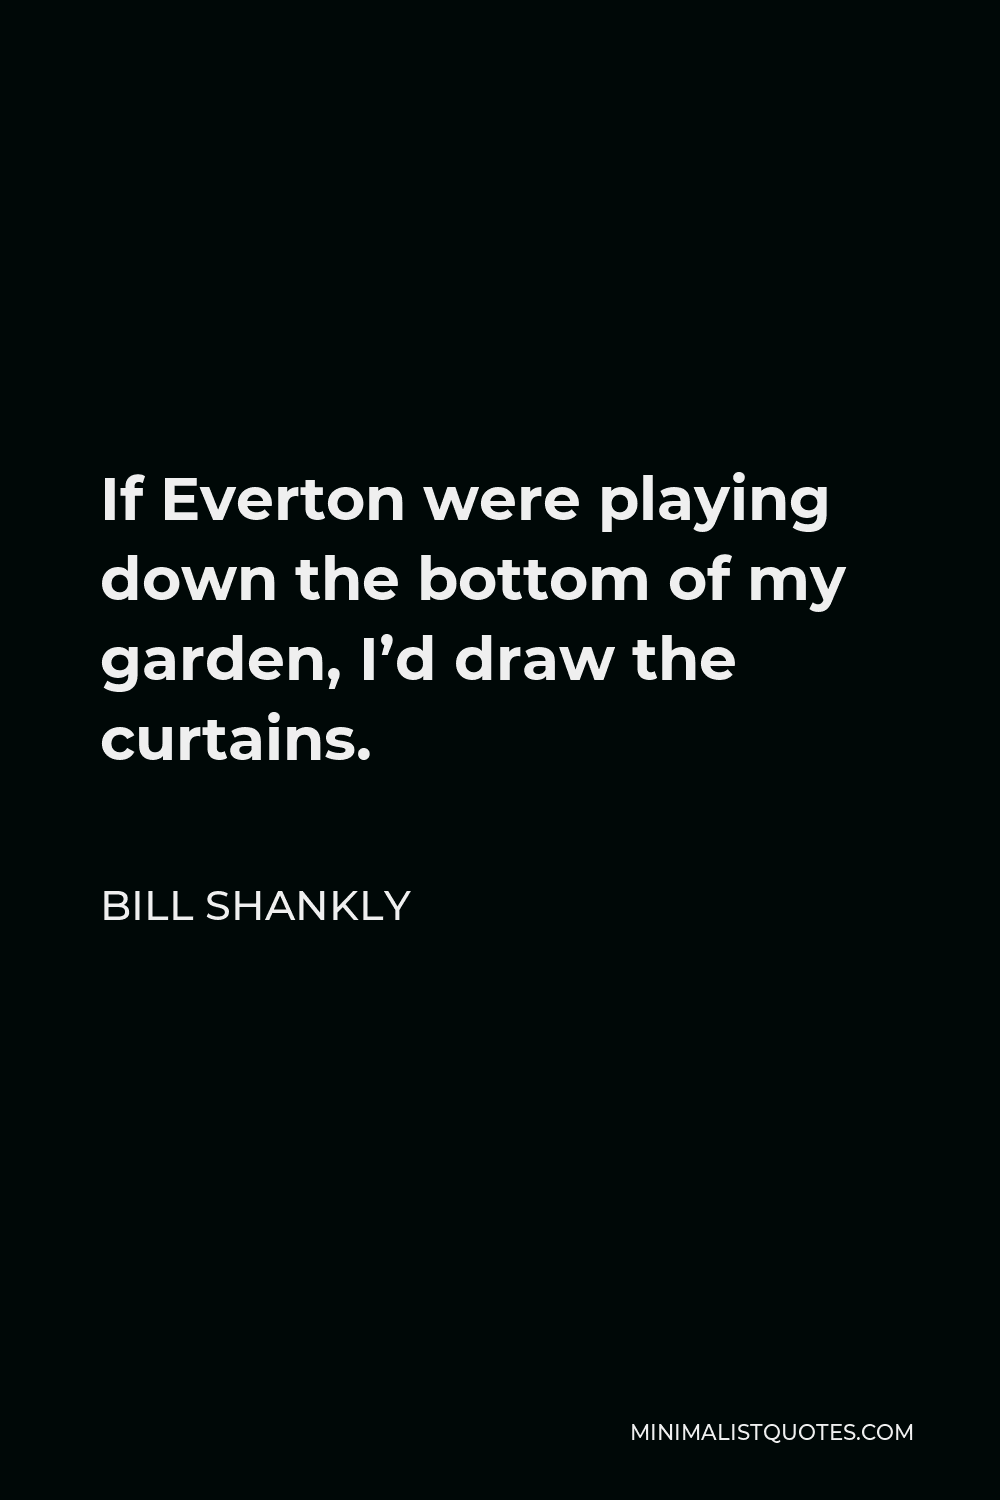 Bill Shankly Quote - If Everton were playing down the bottom of my garden, I’d draw the curtains.